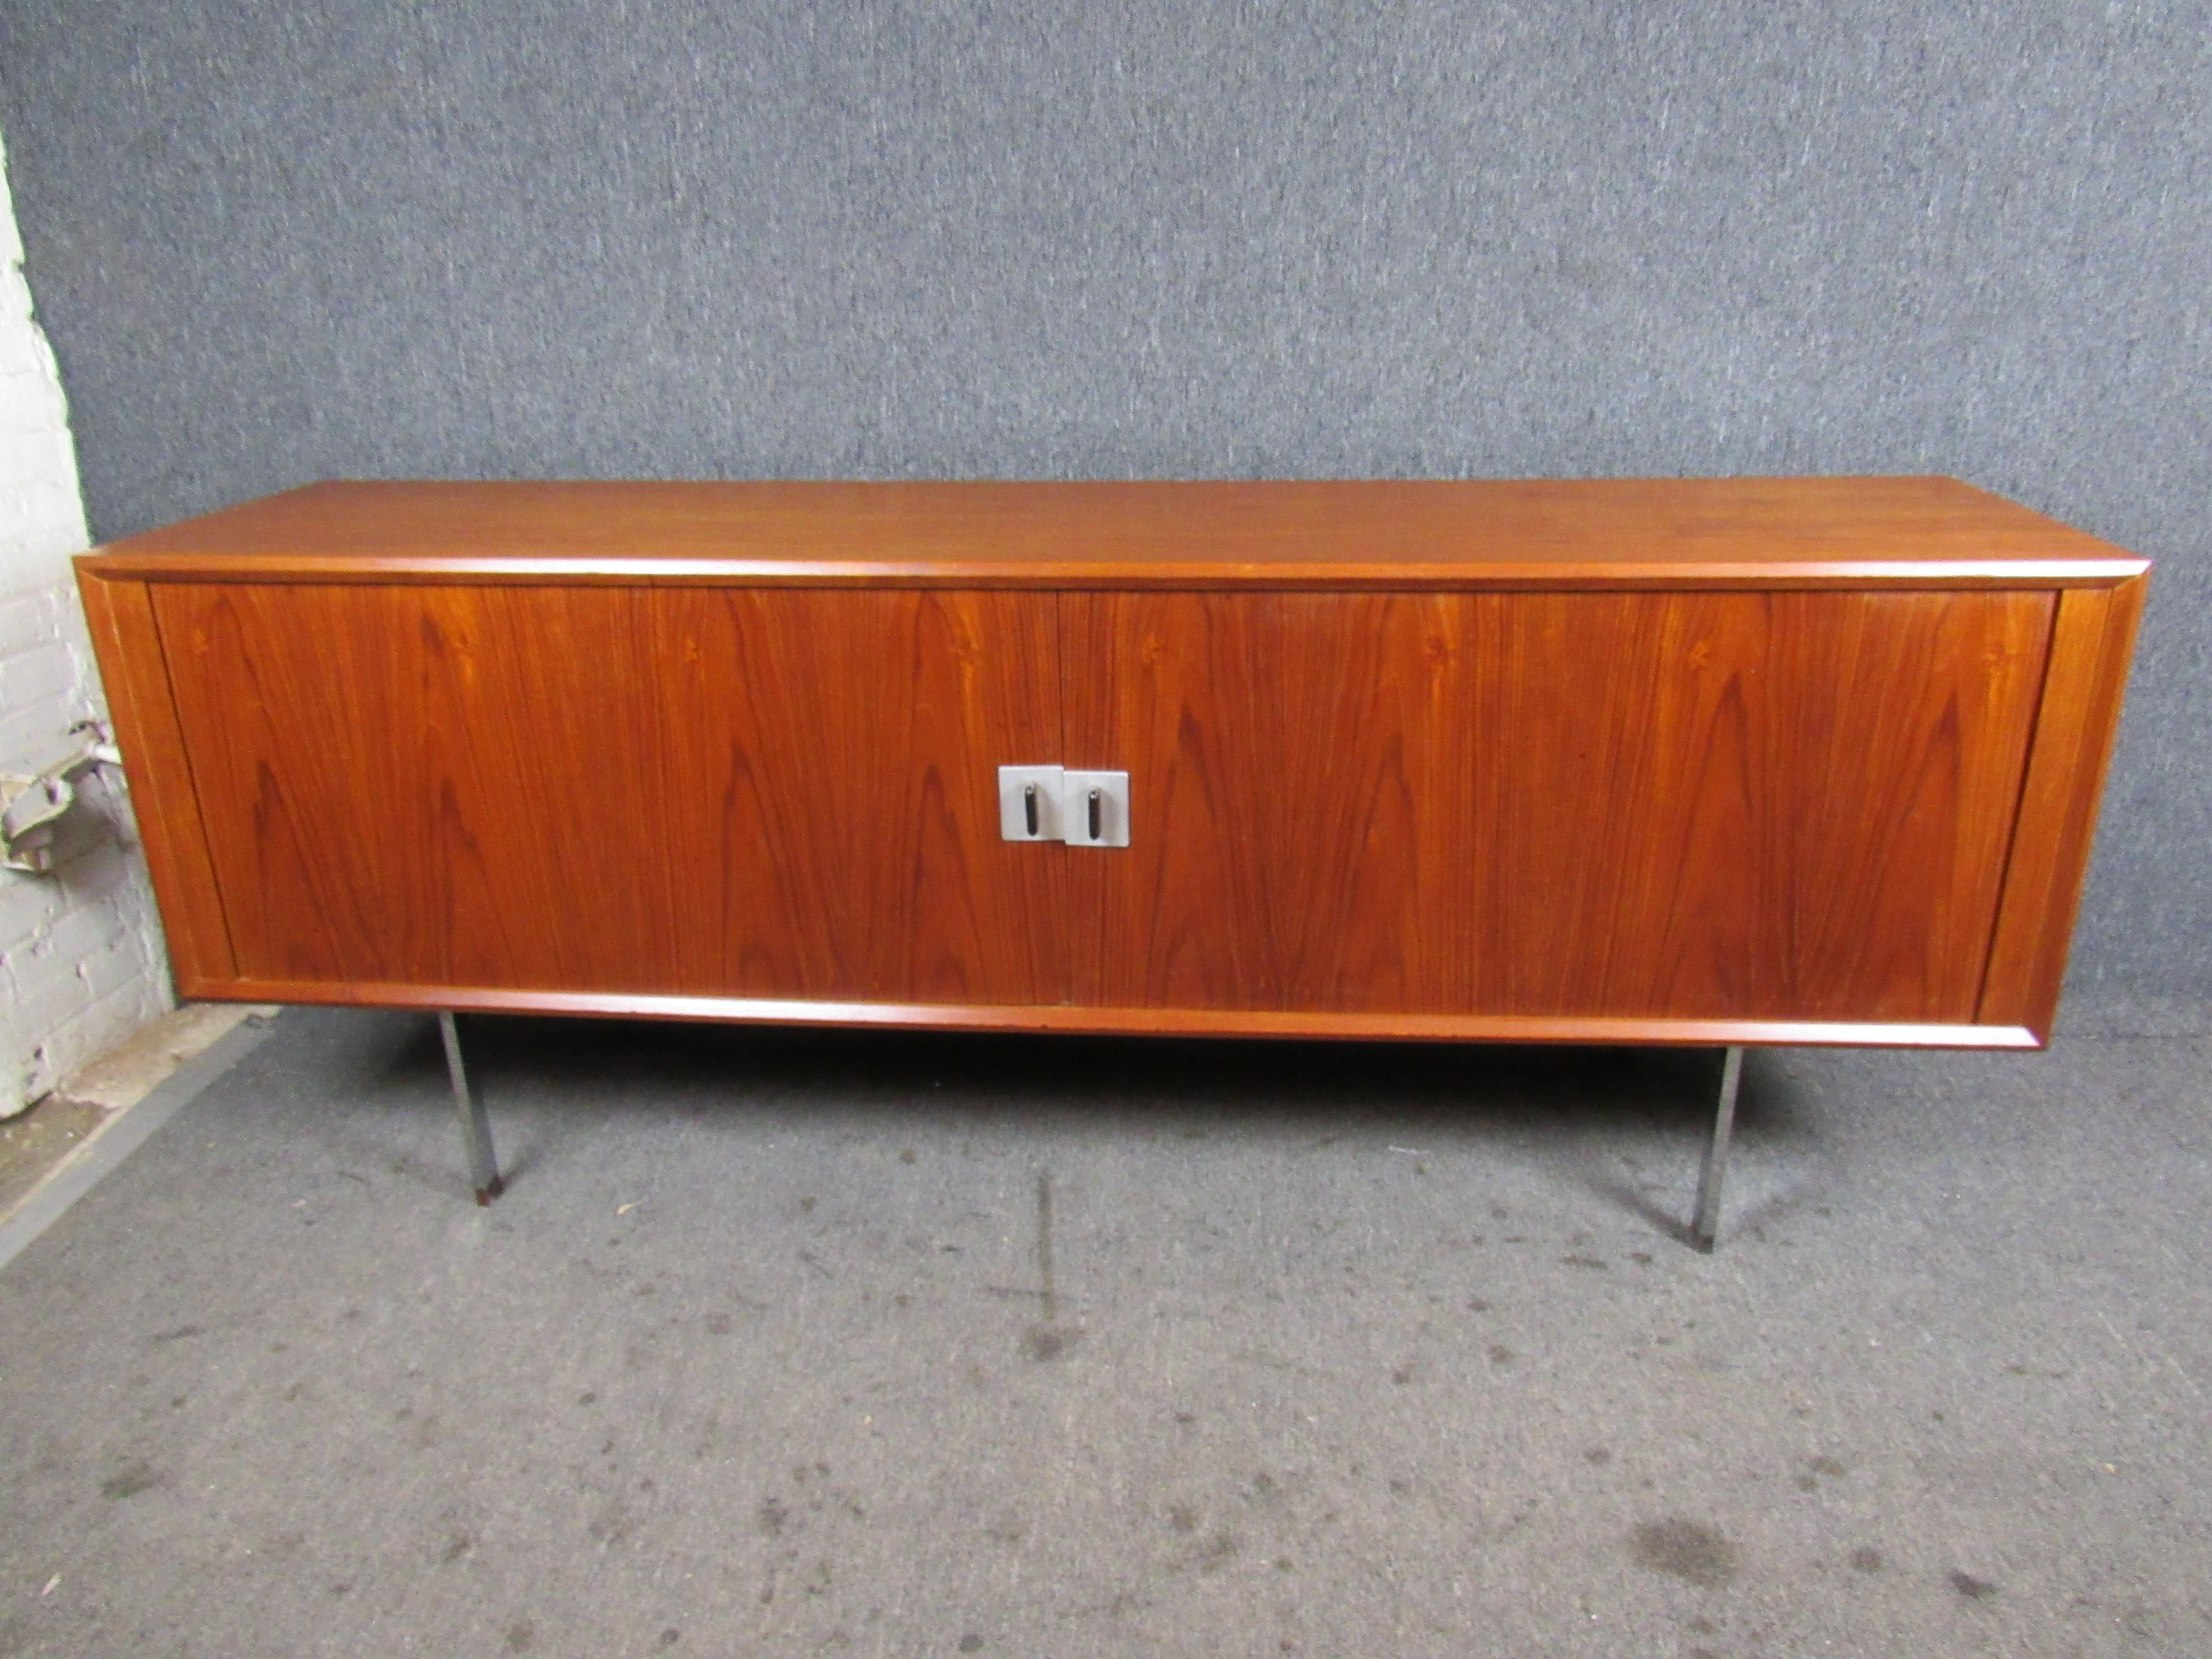 Mid-Century Modern Danish Credenza by Hans Wegner. Stunning credenza with tambour doors which reveal a spacious interior storage area. Inside includes modular shelving capabilities as well as three small drawers lined with soft wool material. The